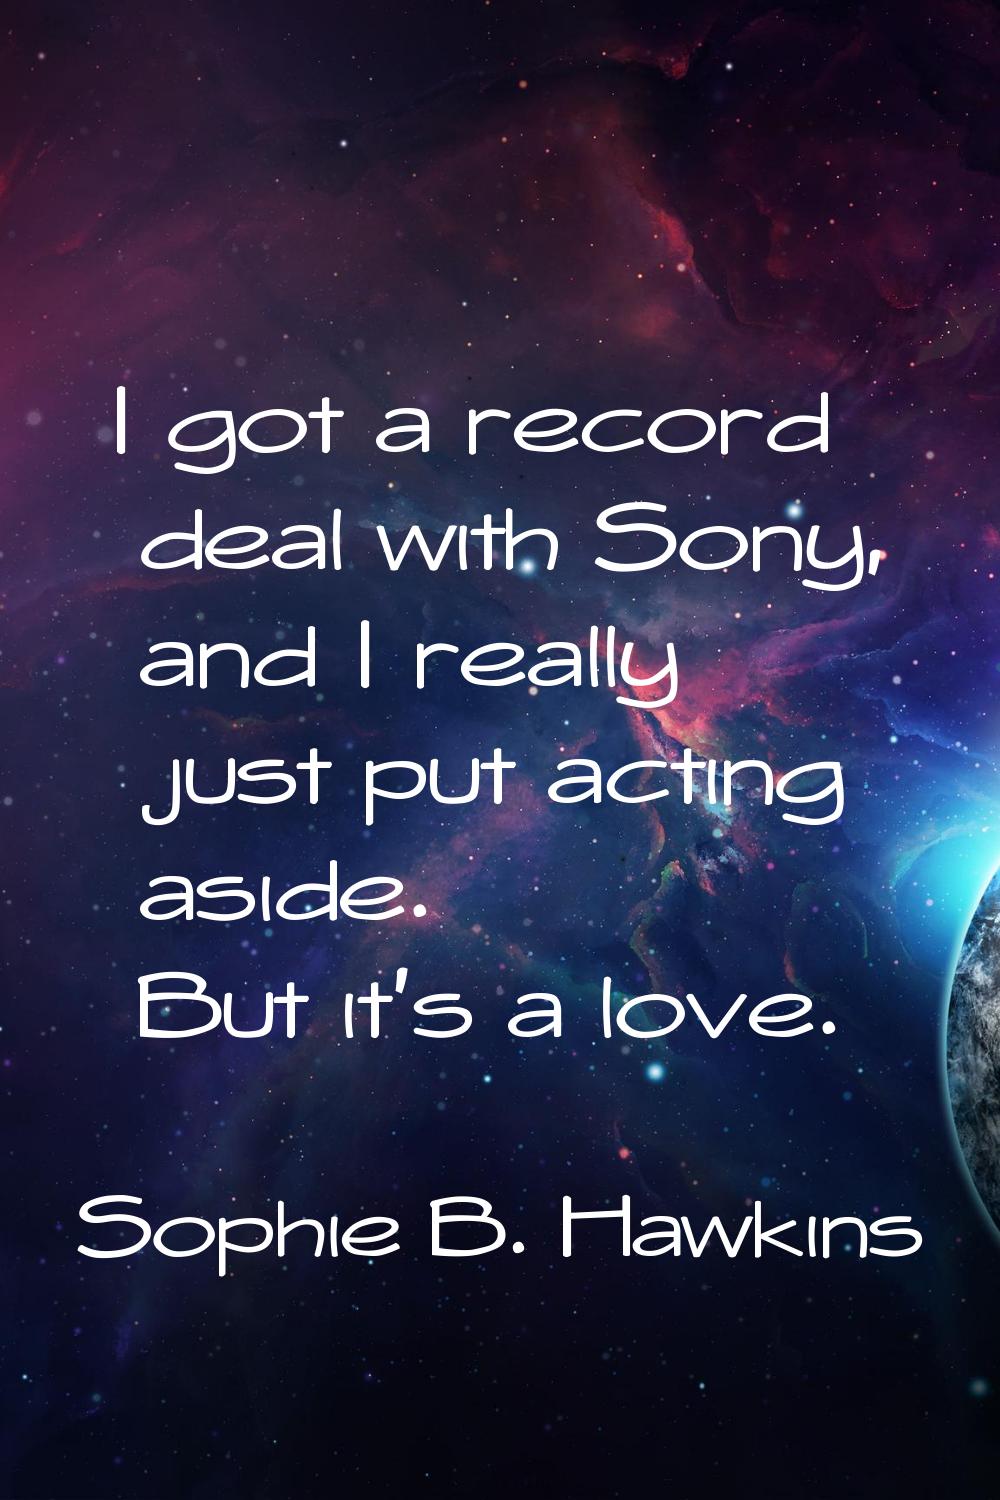 I got a record deal with Sony, and I really just put acting aside. But it's a love.